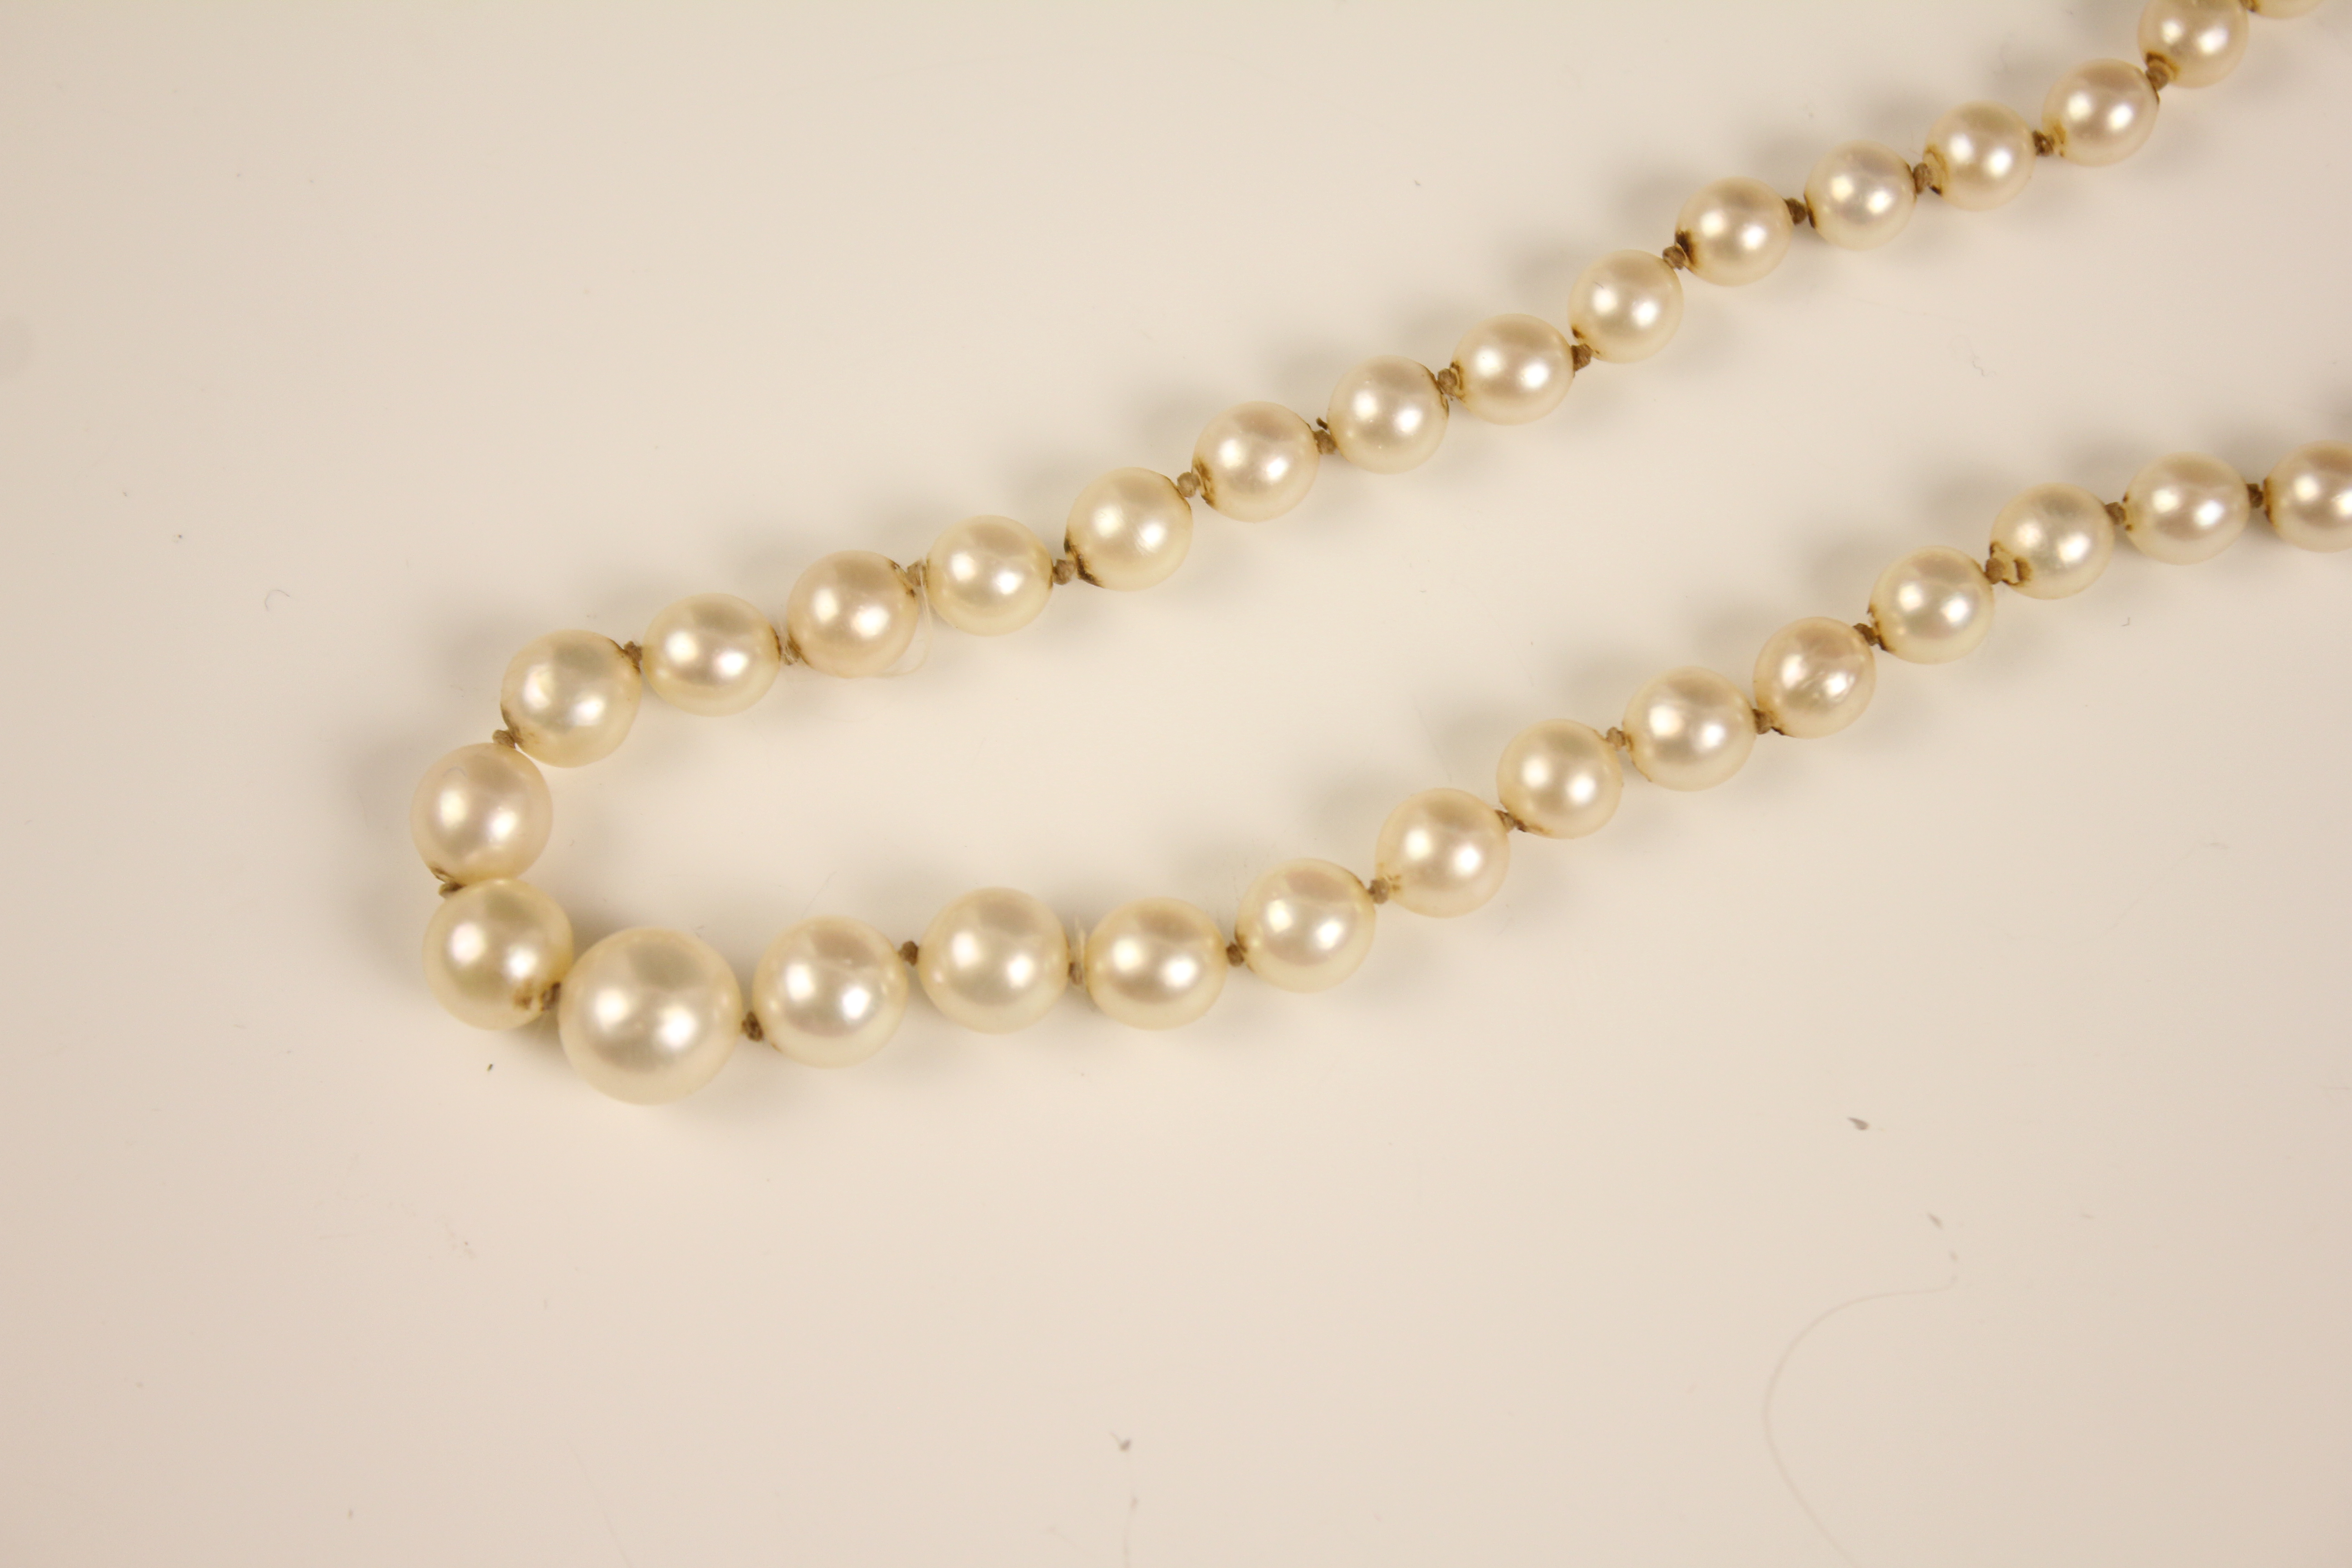 An early 20th century cultured pearl necklace, designed as a single row of round cultured pearls, - Image 6 of 12